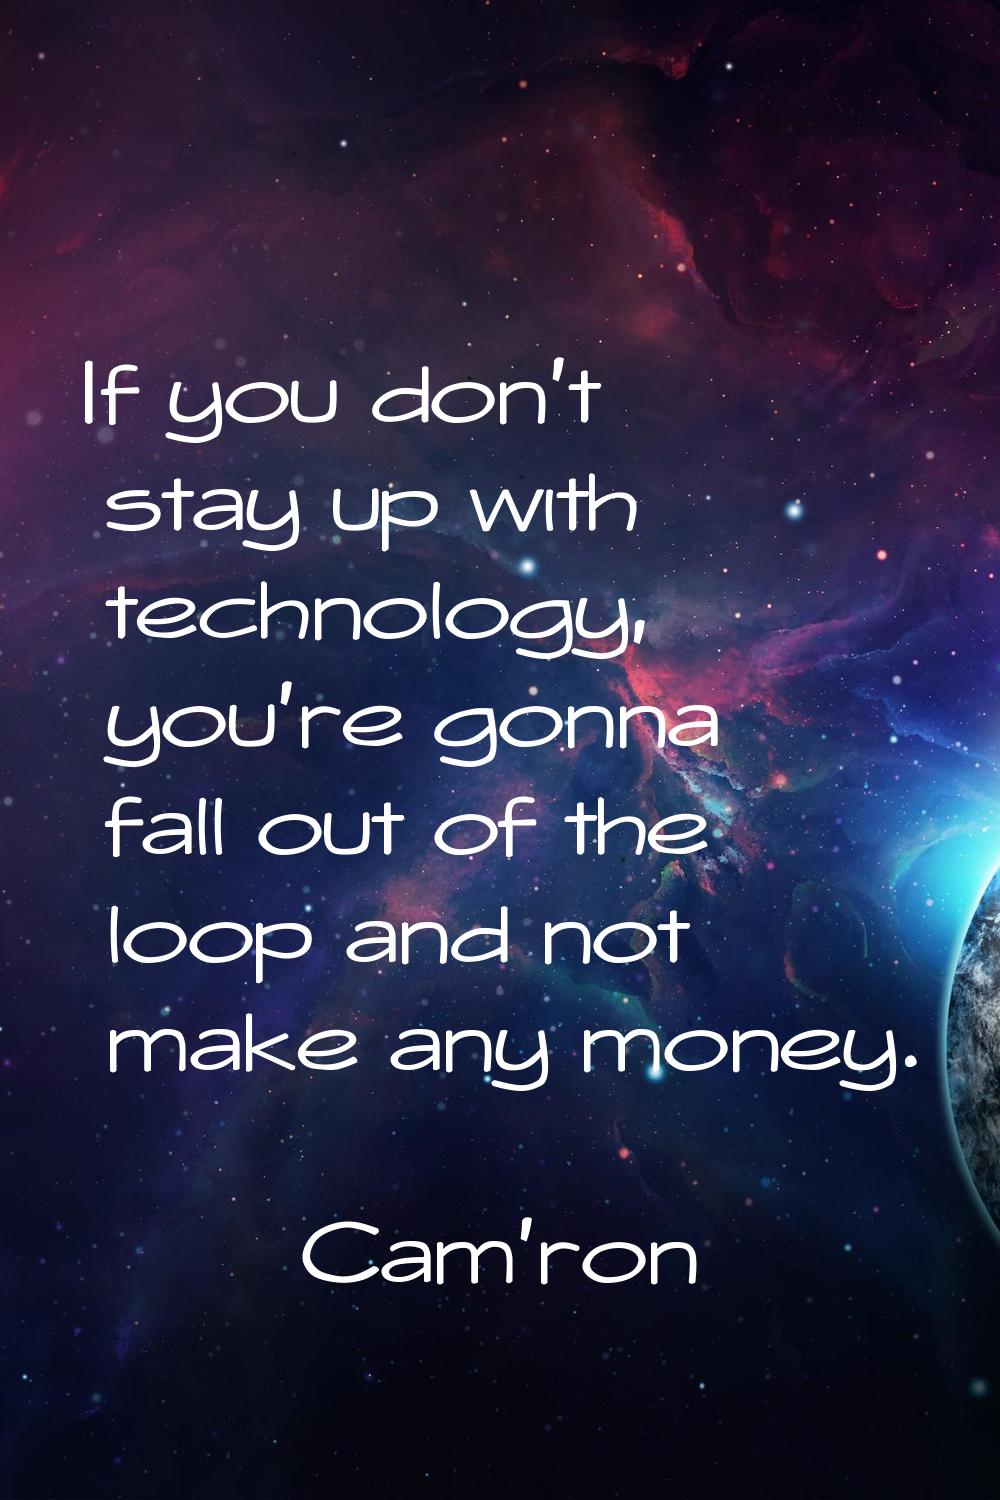 If you don't stay up with technology, you're gonna fall out of the loop and not make any money.